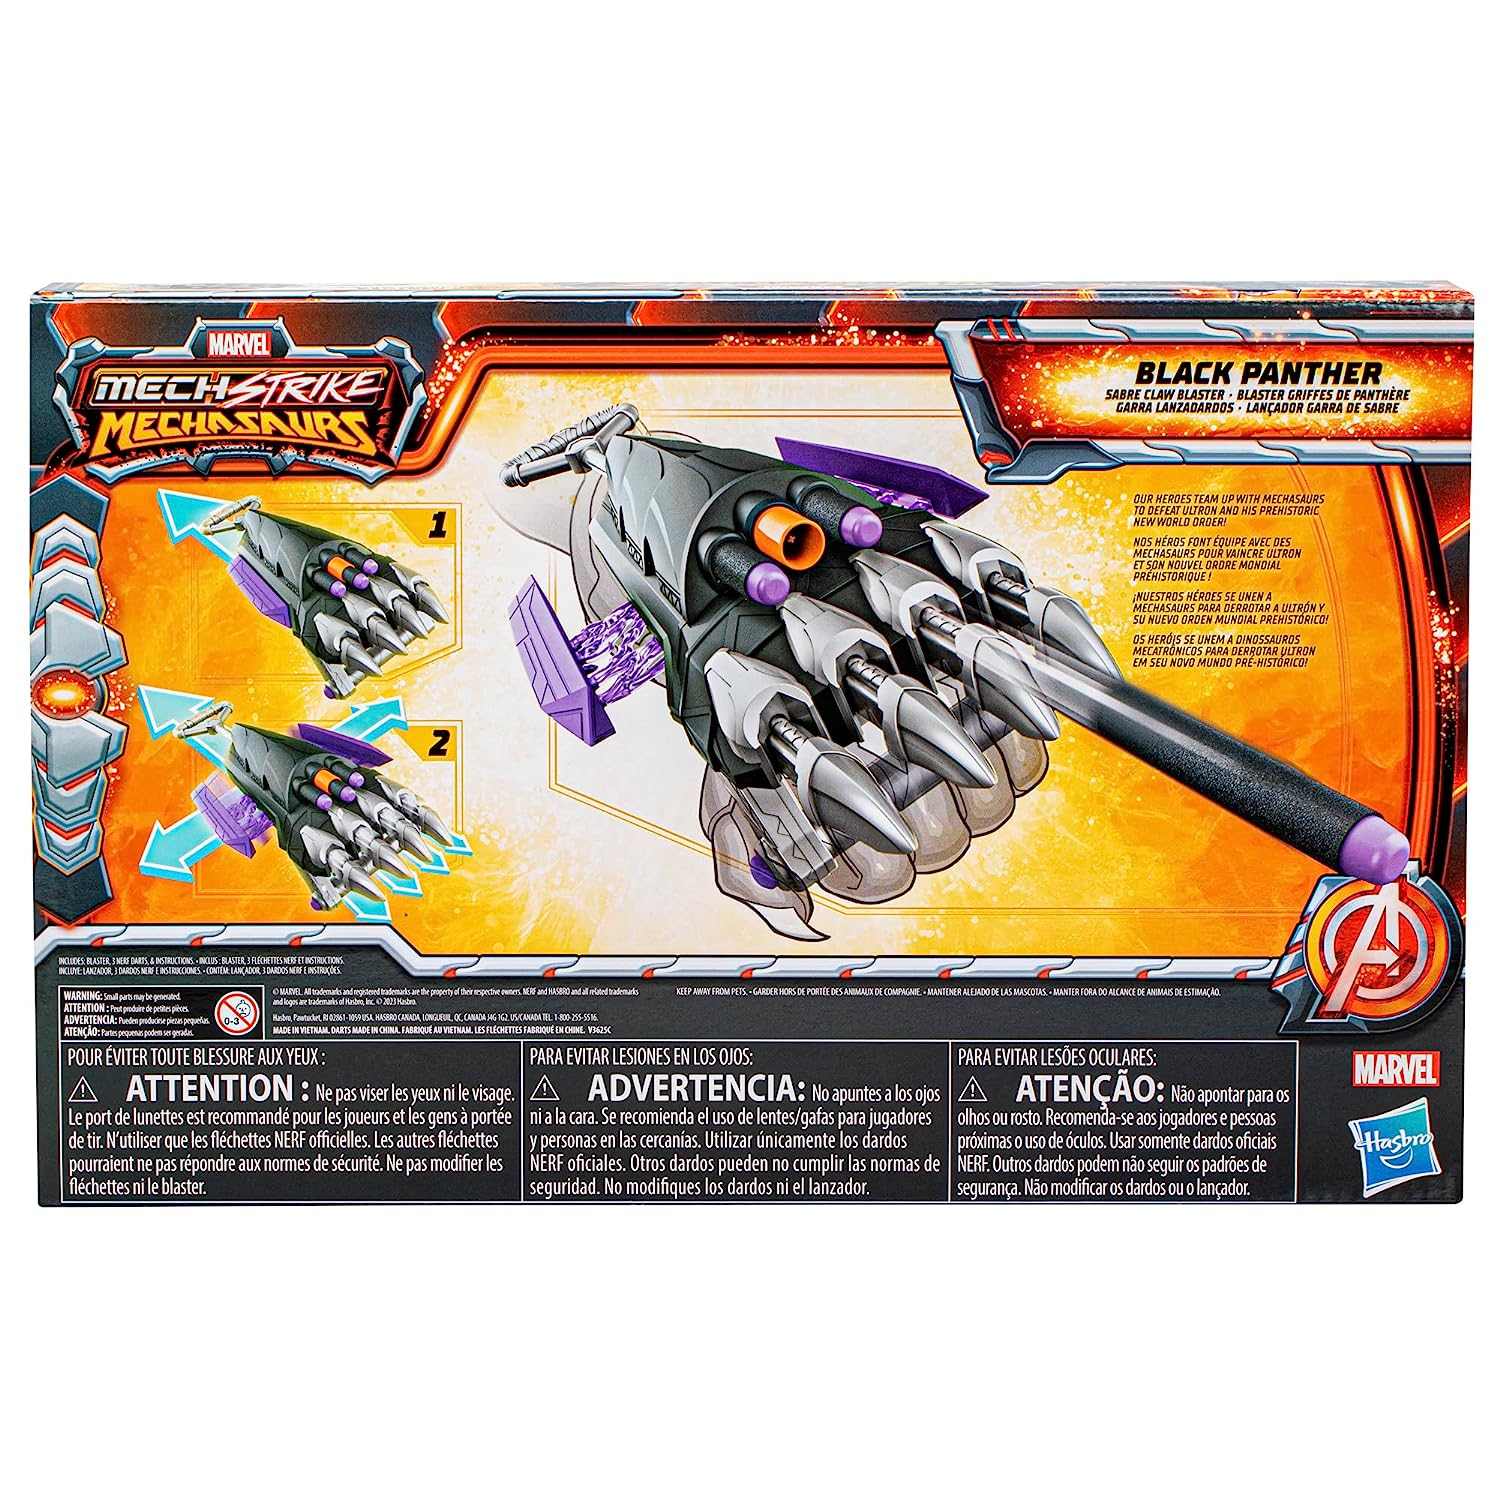 Marvel Mech Strike Mechasaurs Black Panther Sabre Claw NERF Blaster with 3 Darts for Kids Ages 5 Years and Up